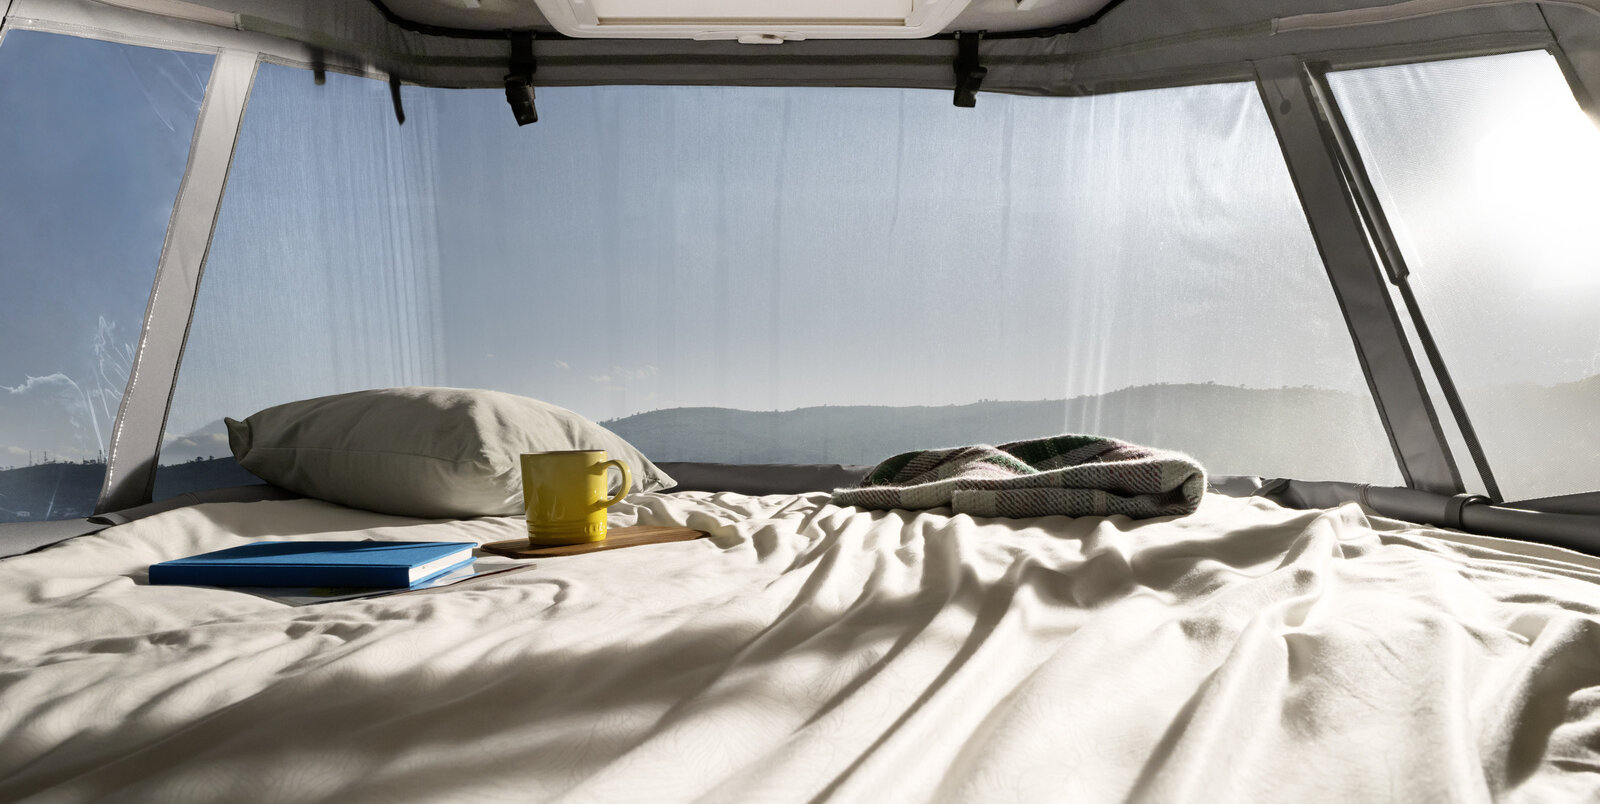 Covered bed, pillows and magazine under the pop-up roof of the HYMER Camper Van